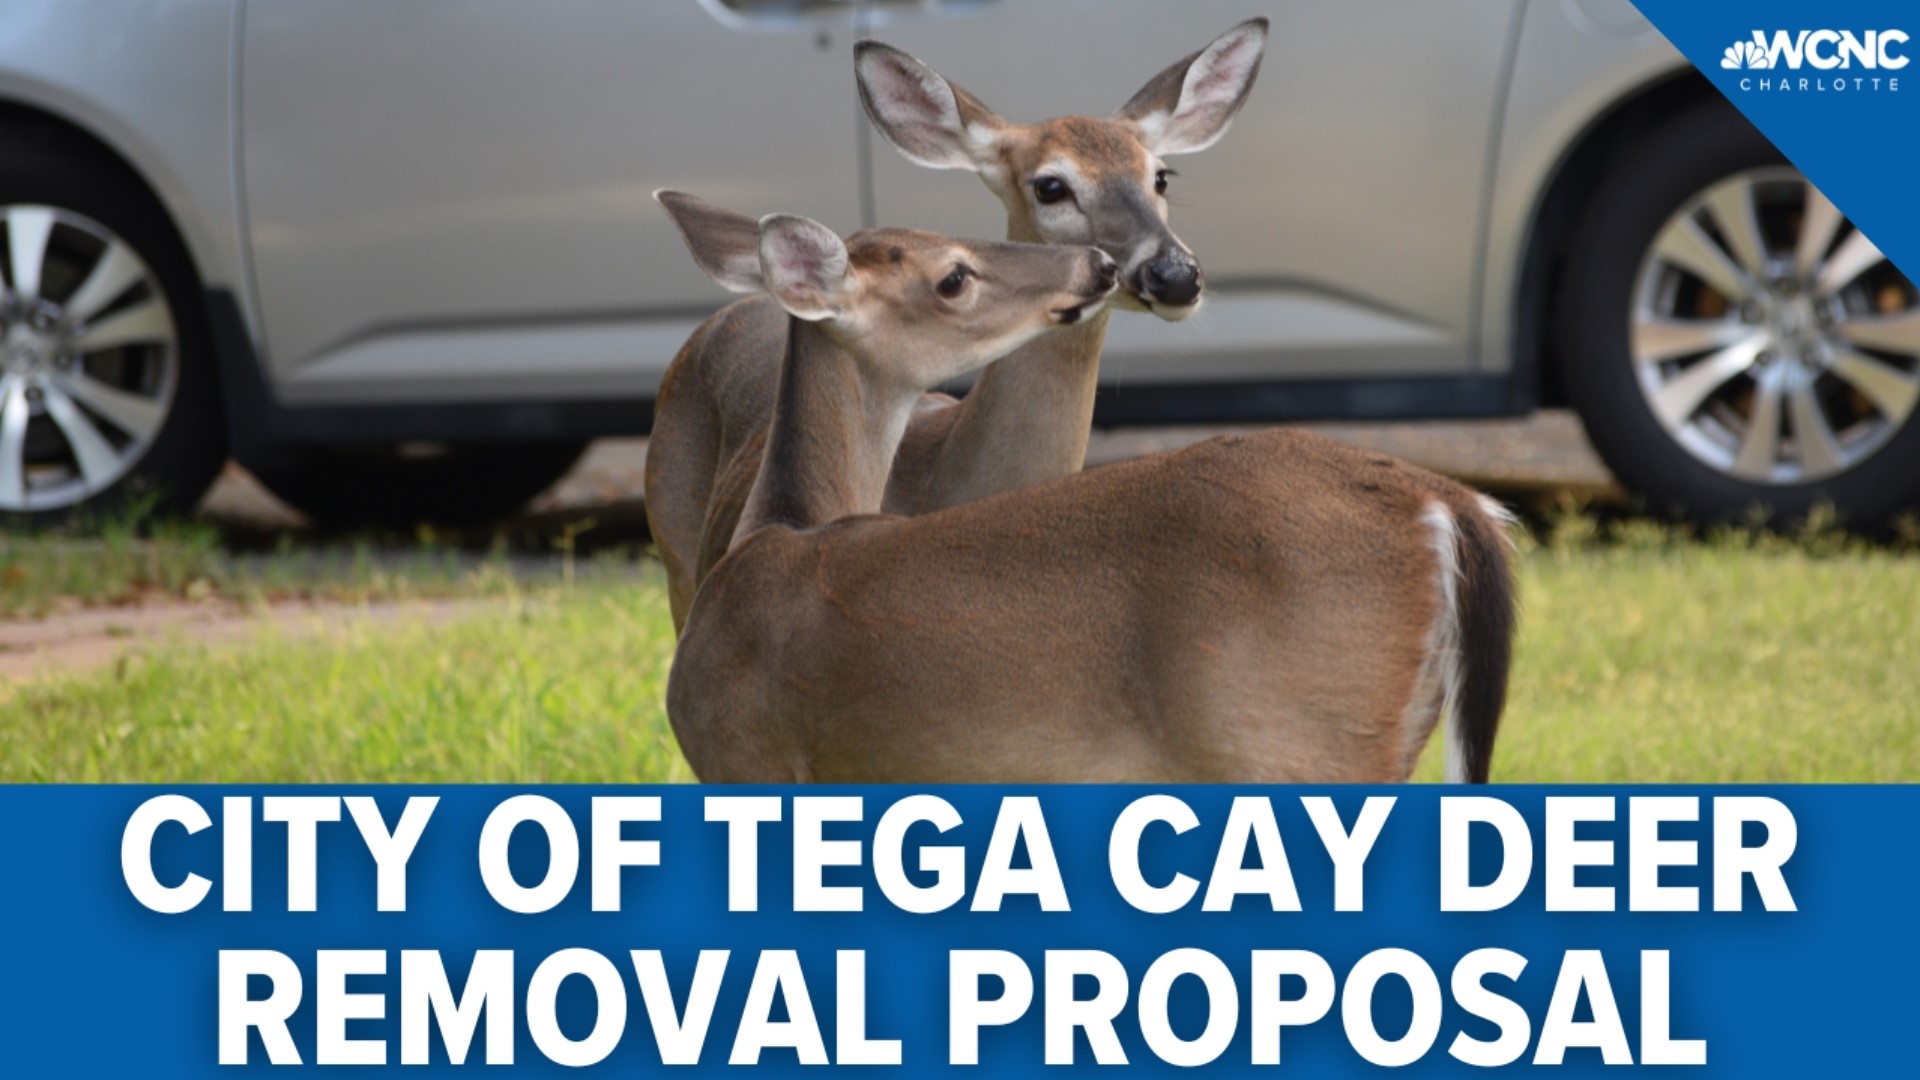 An overwhelming deer population has the city of Tega Cay is seeking a solution.